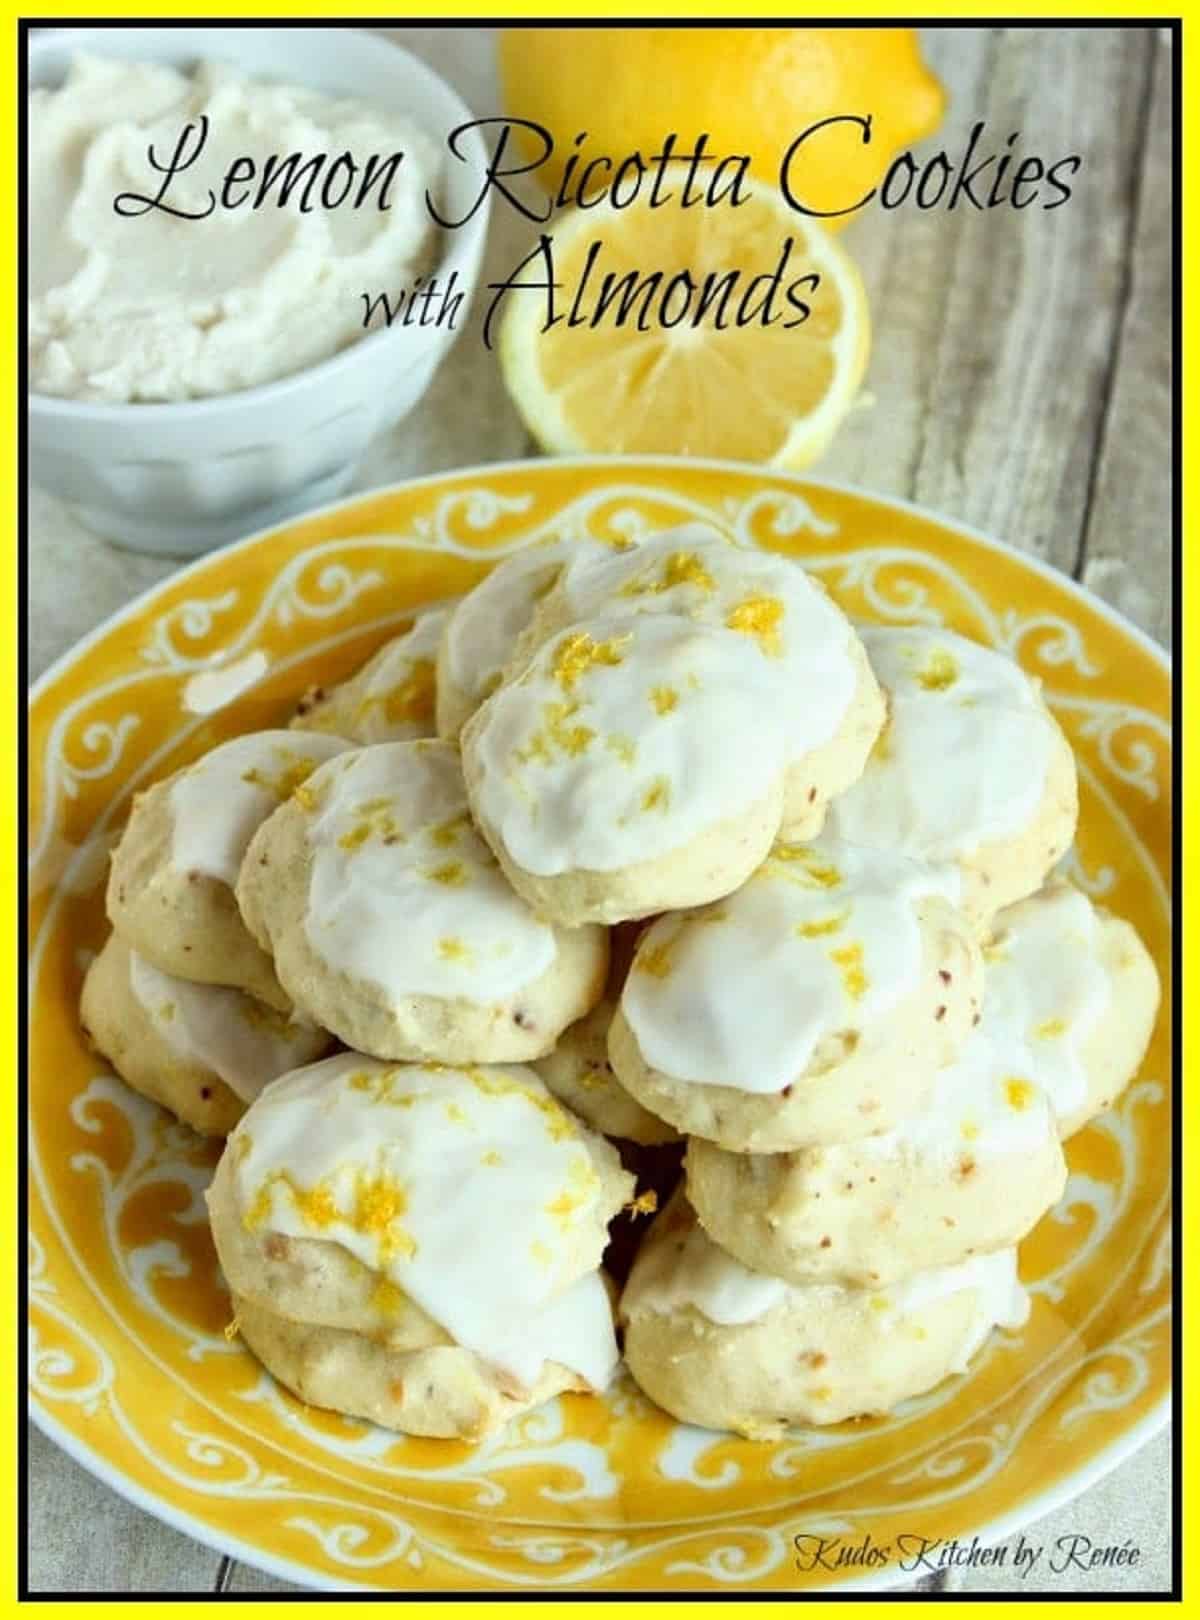 A yellow plate filled with Lemon Ricotta Cookies with Almonds.